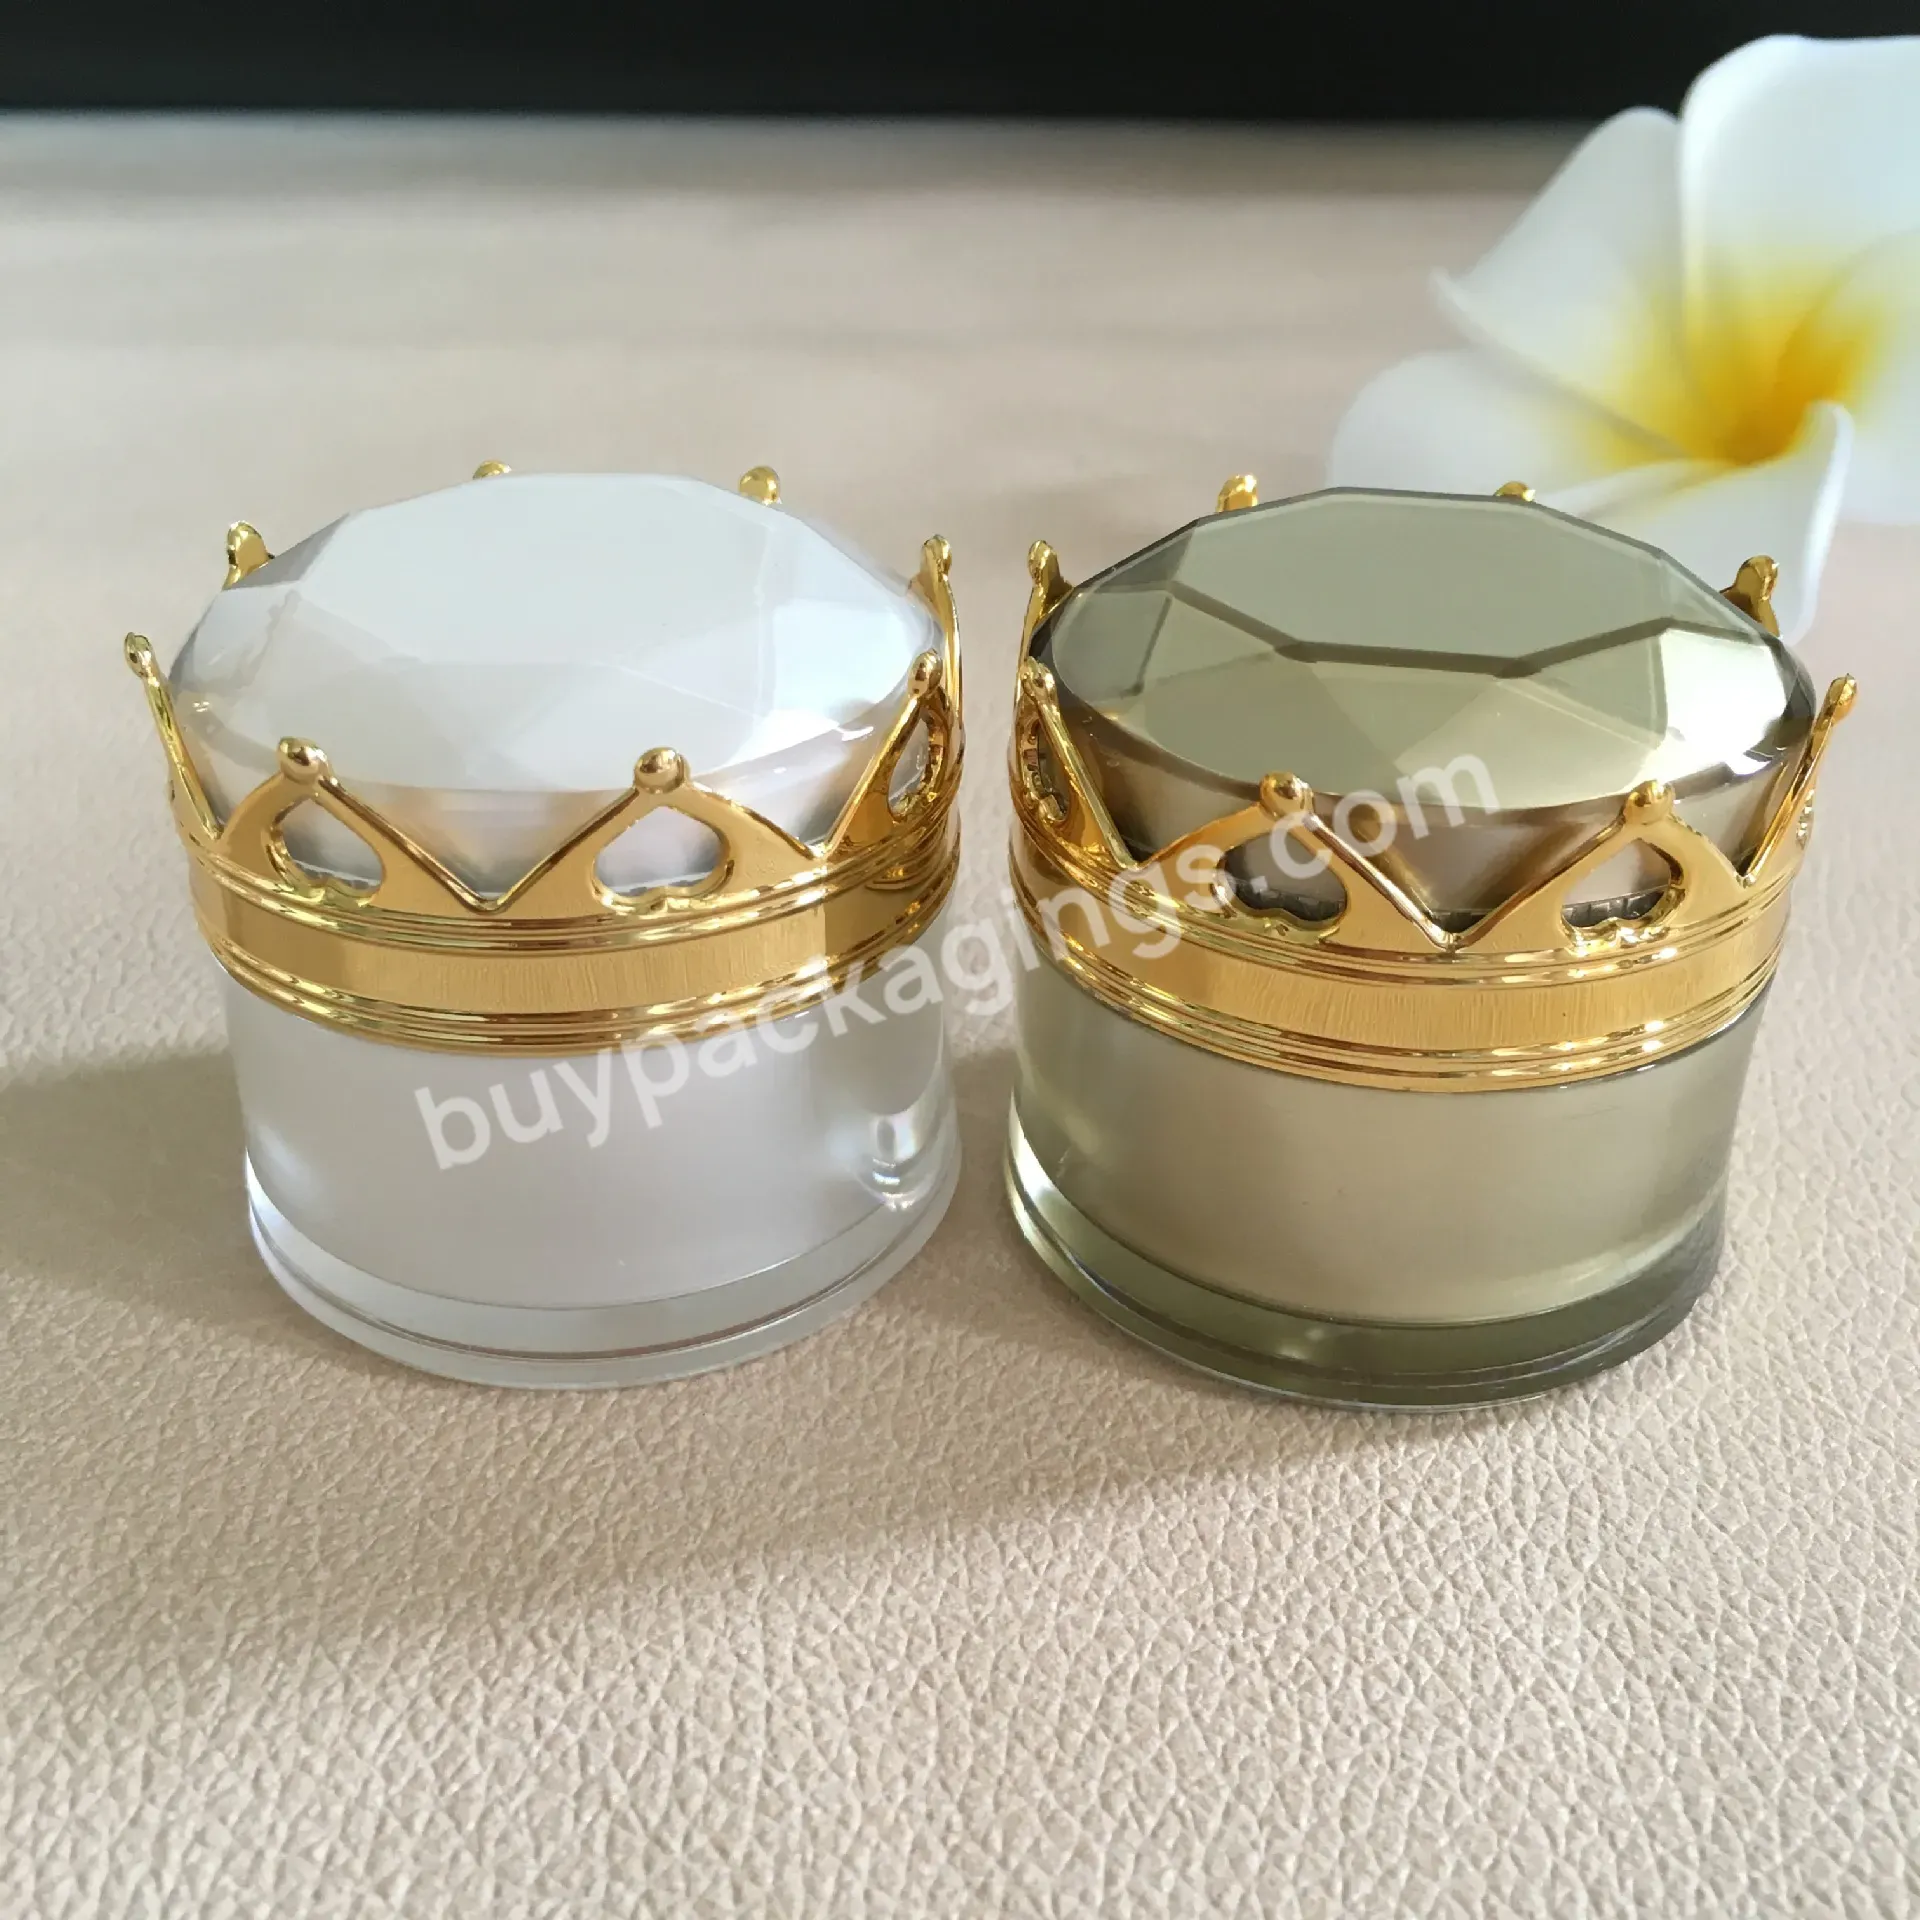 High End Cosmetic Packaging Skin Care Face Cream Container Gold Round 5g 10g 15g 20g Acrylic Cosmetic Jar - Buy Body Butter Cream Jar,Gold Jar Cosmetic,Acrylic Cream Container.